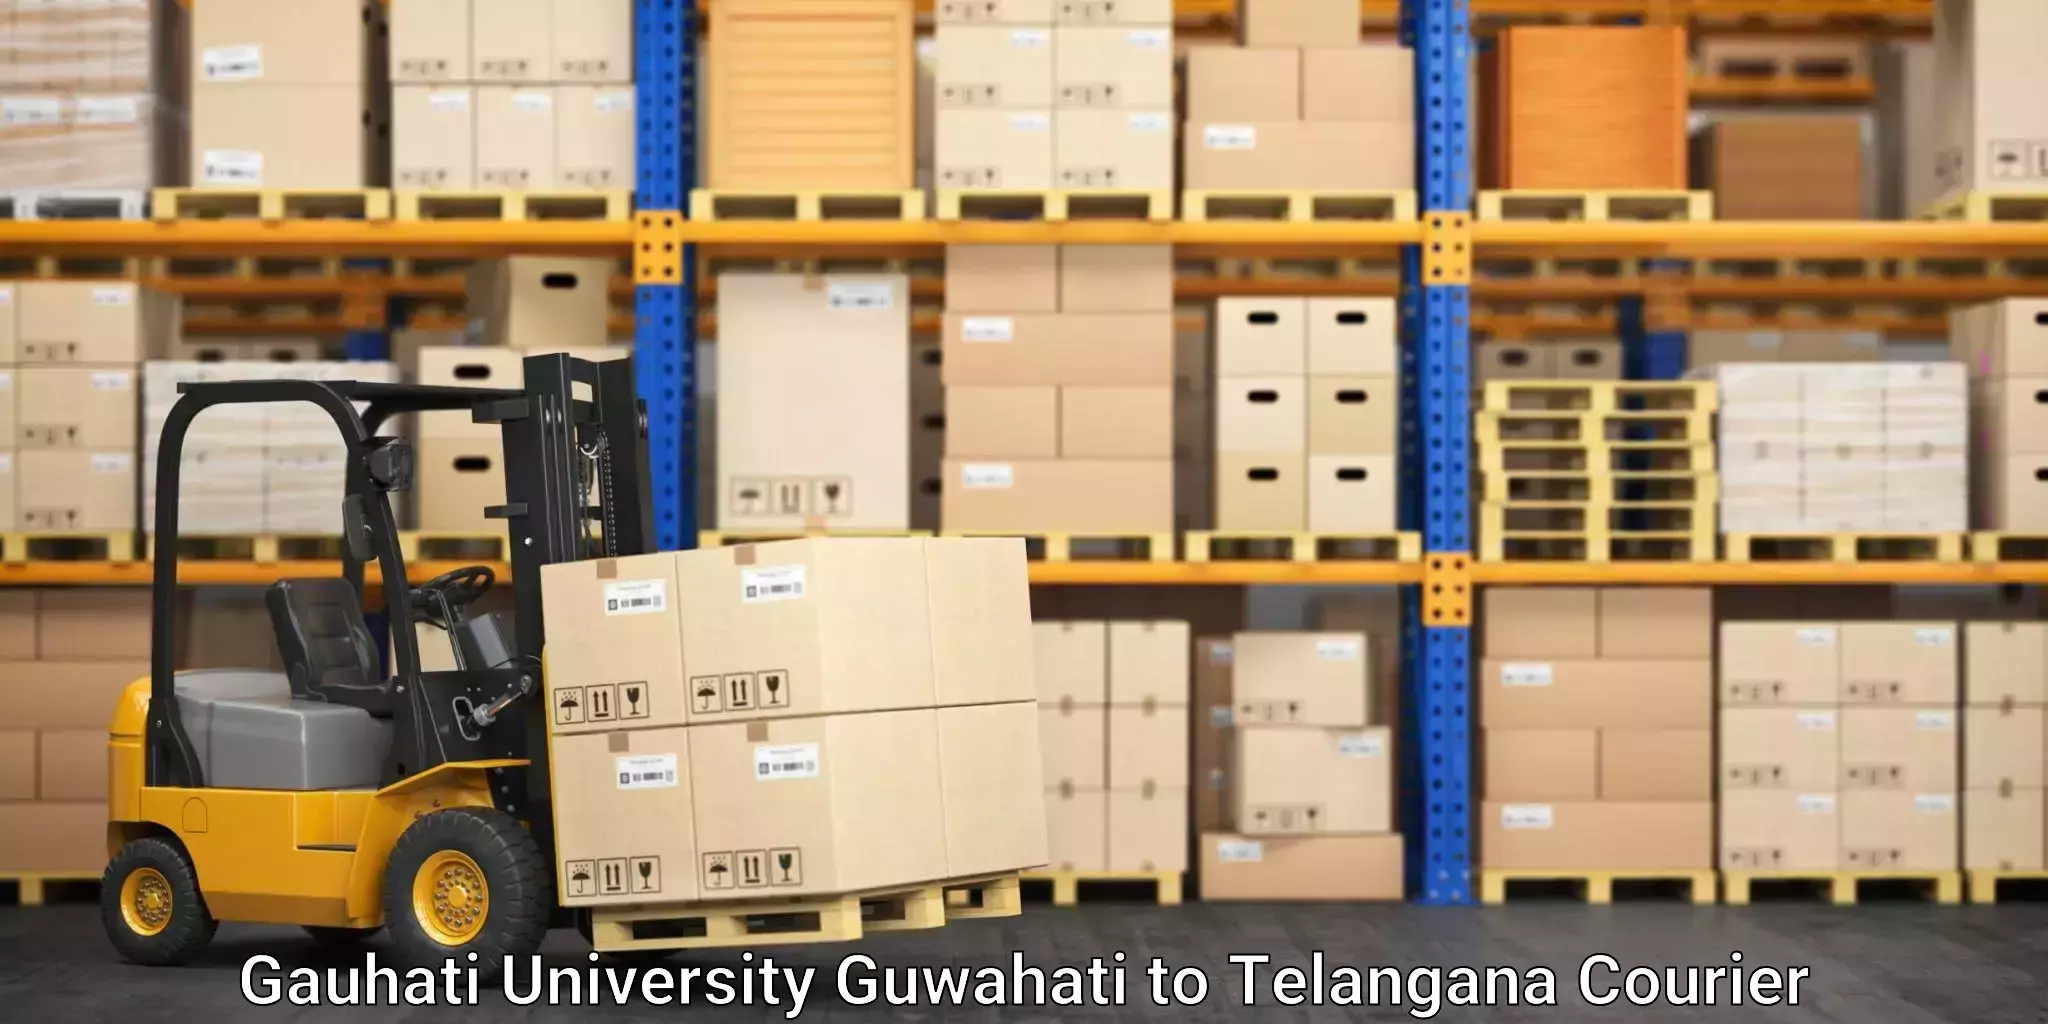 Round-the-clock parcel delivery in Gauhati University Guwahati to Yerrupalem